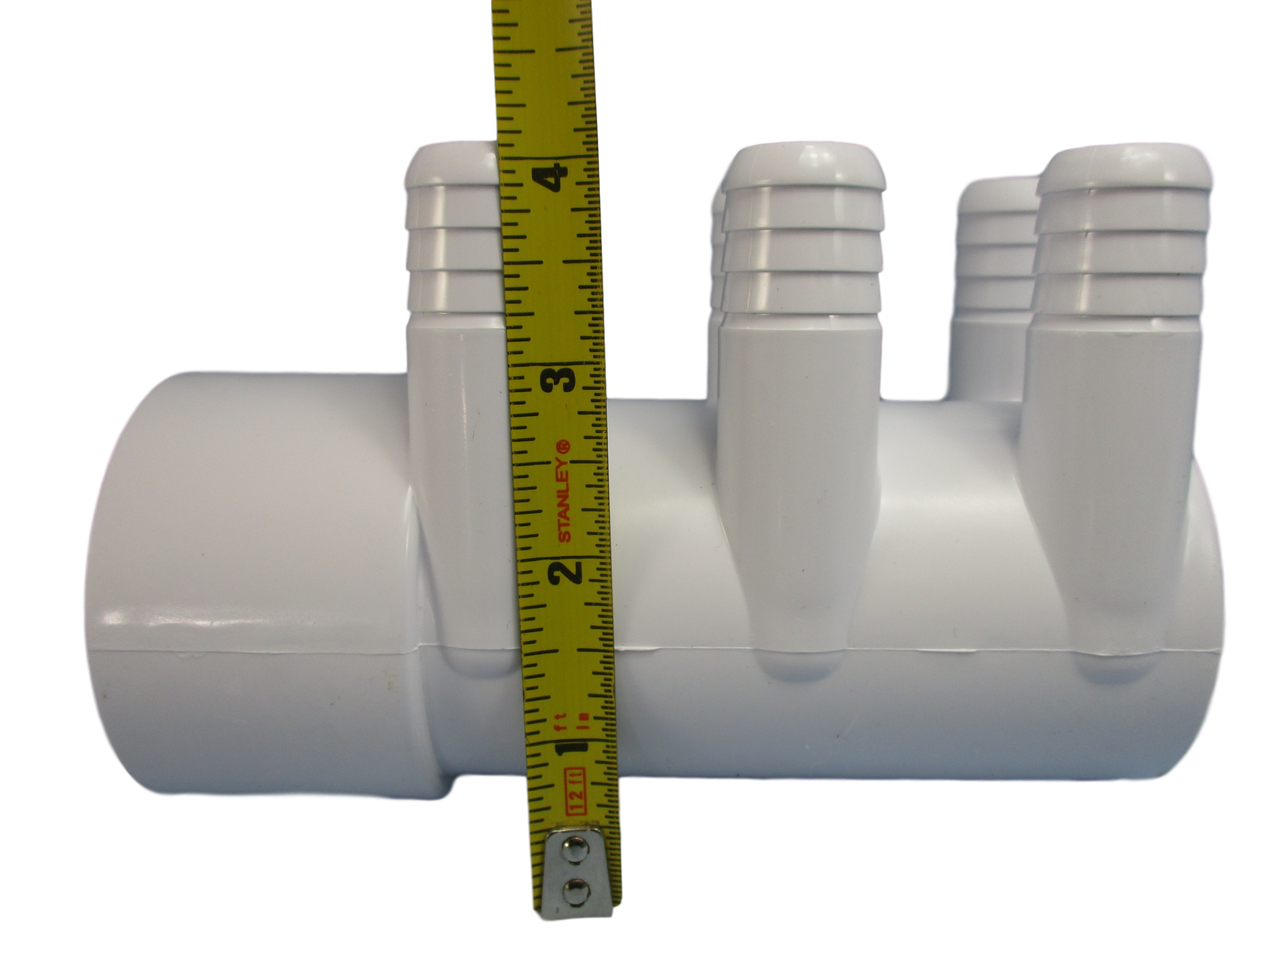 The manifold featured in this kit is Closed on one end the other end receives a 2" Pipe or fitting that would measure 2 3/8" OD..